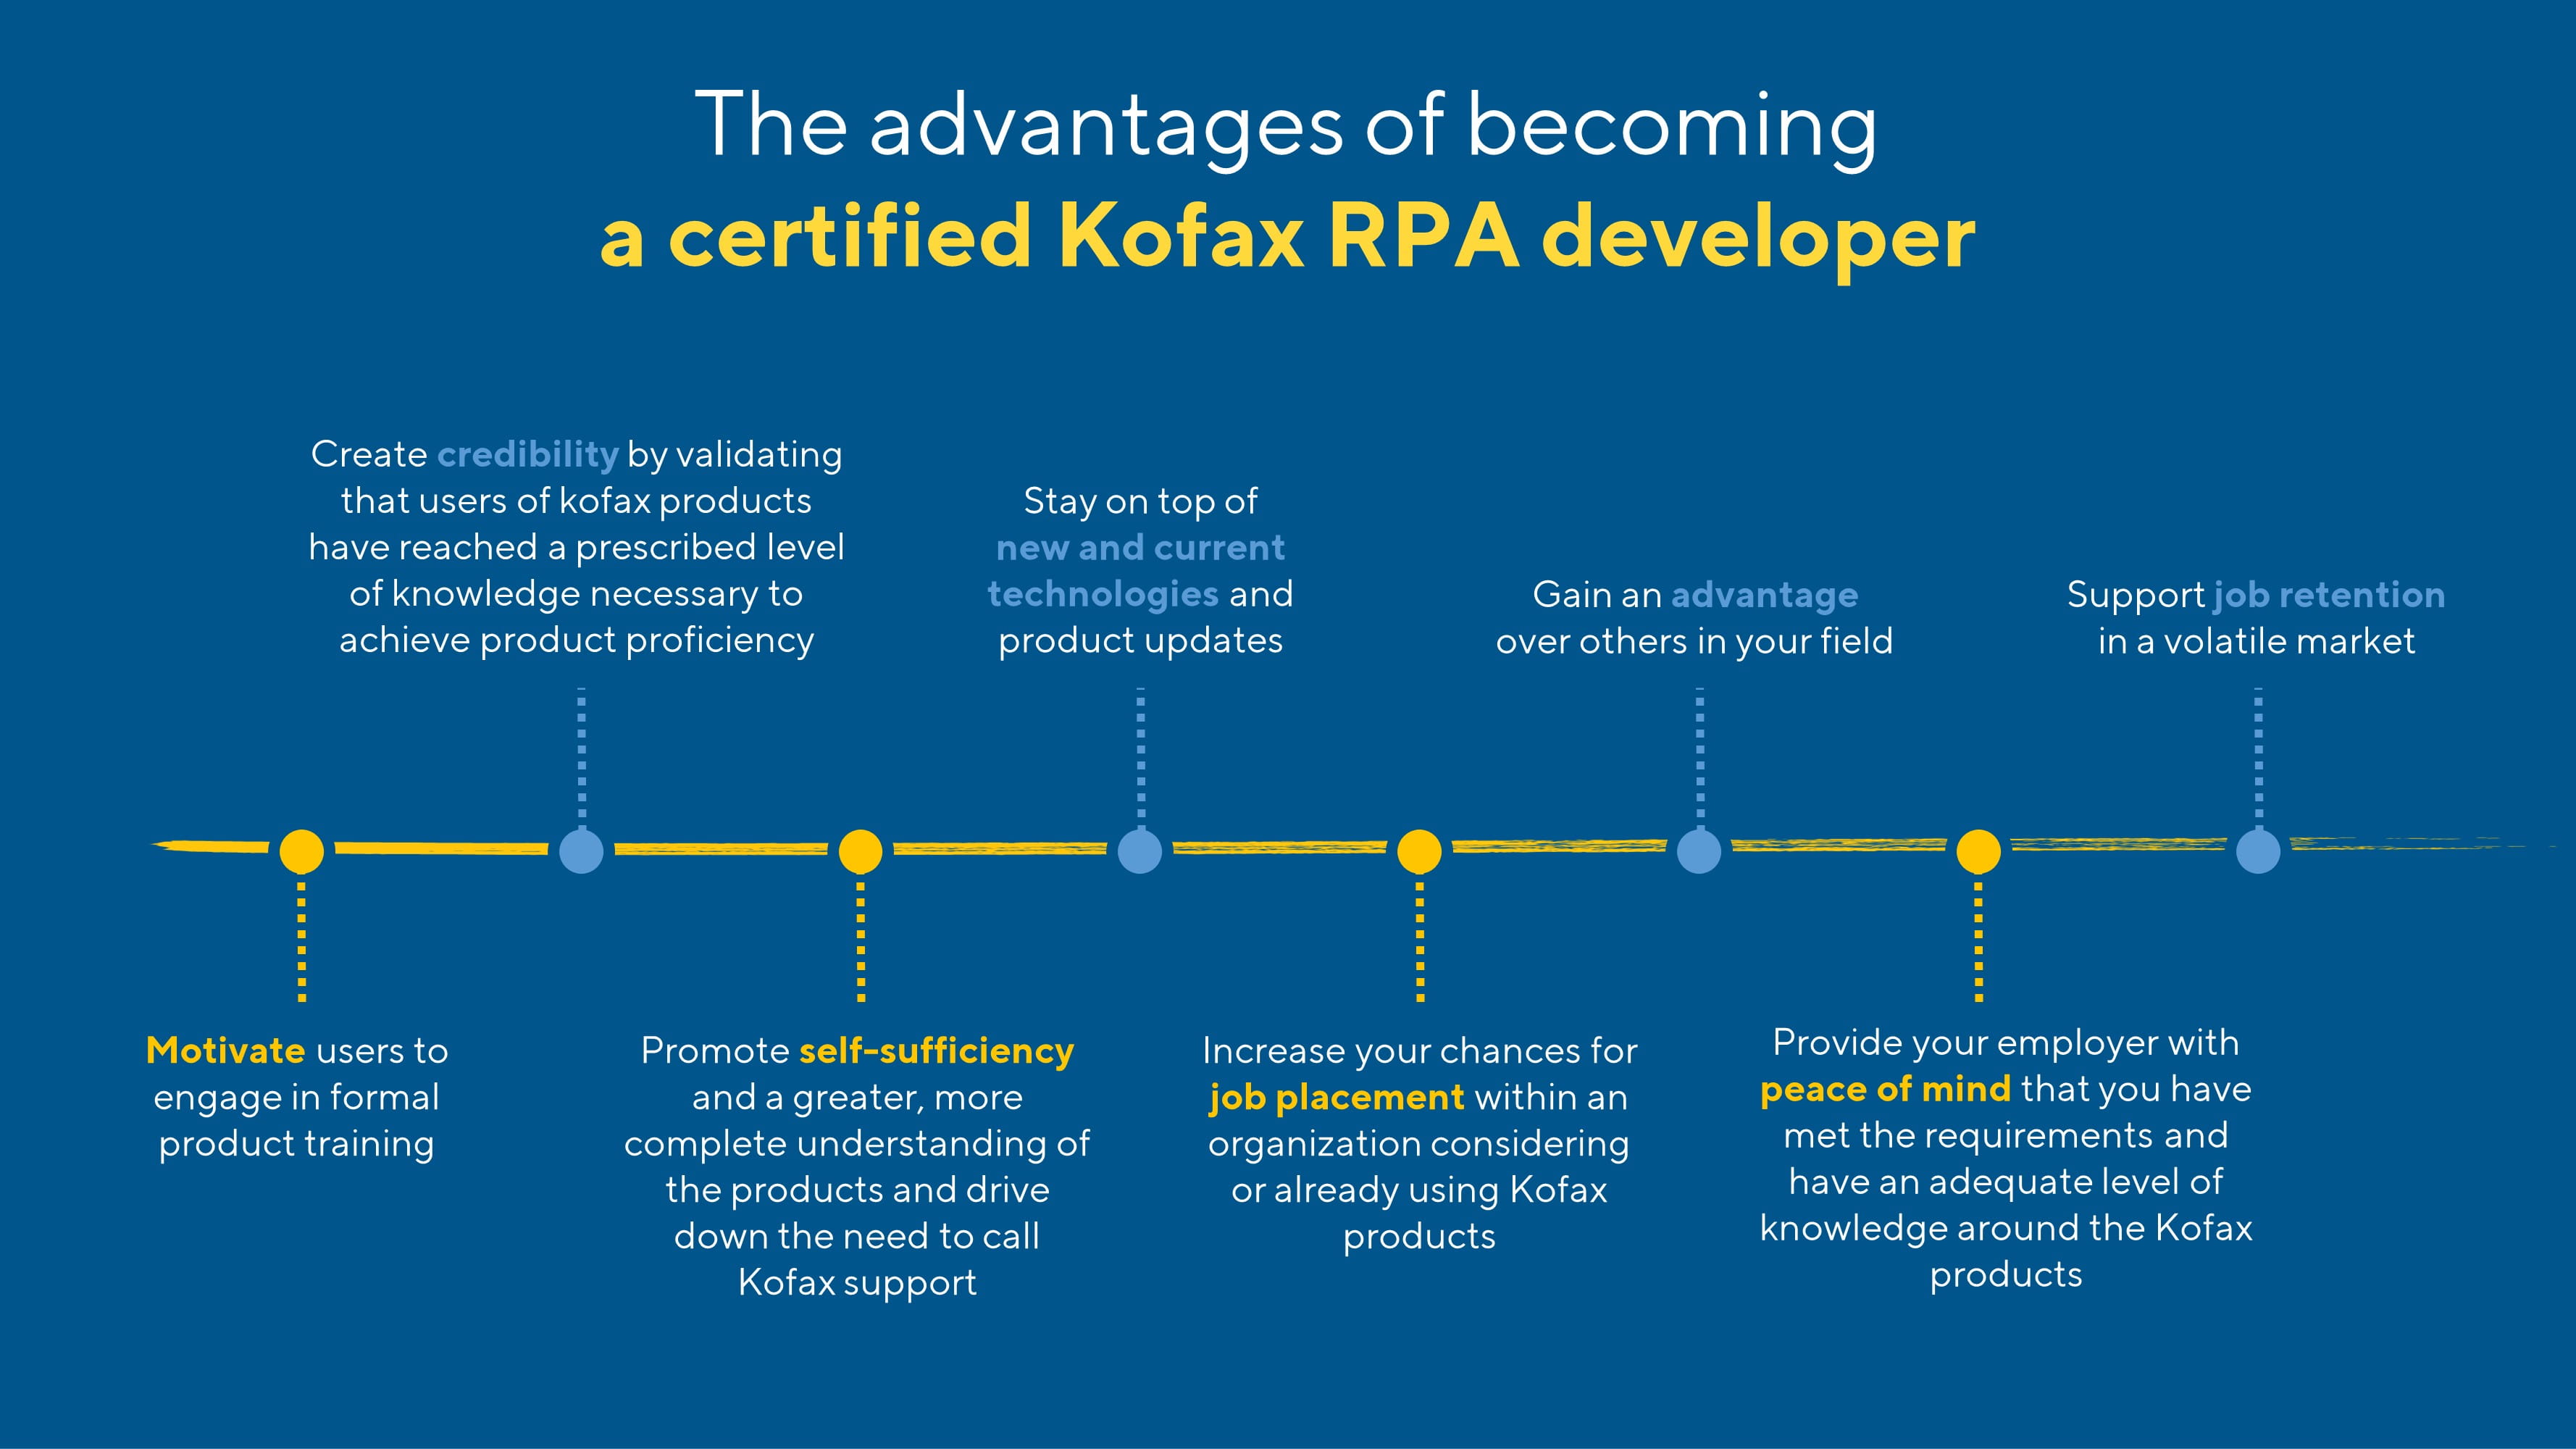 The advantages of becoming a certified RPA developer.